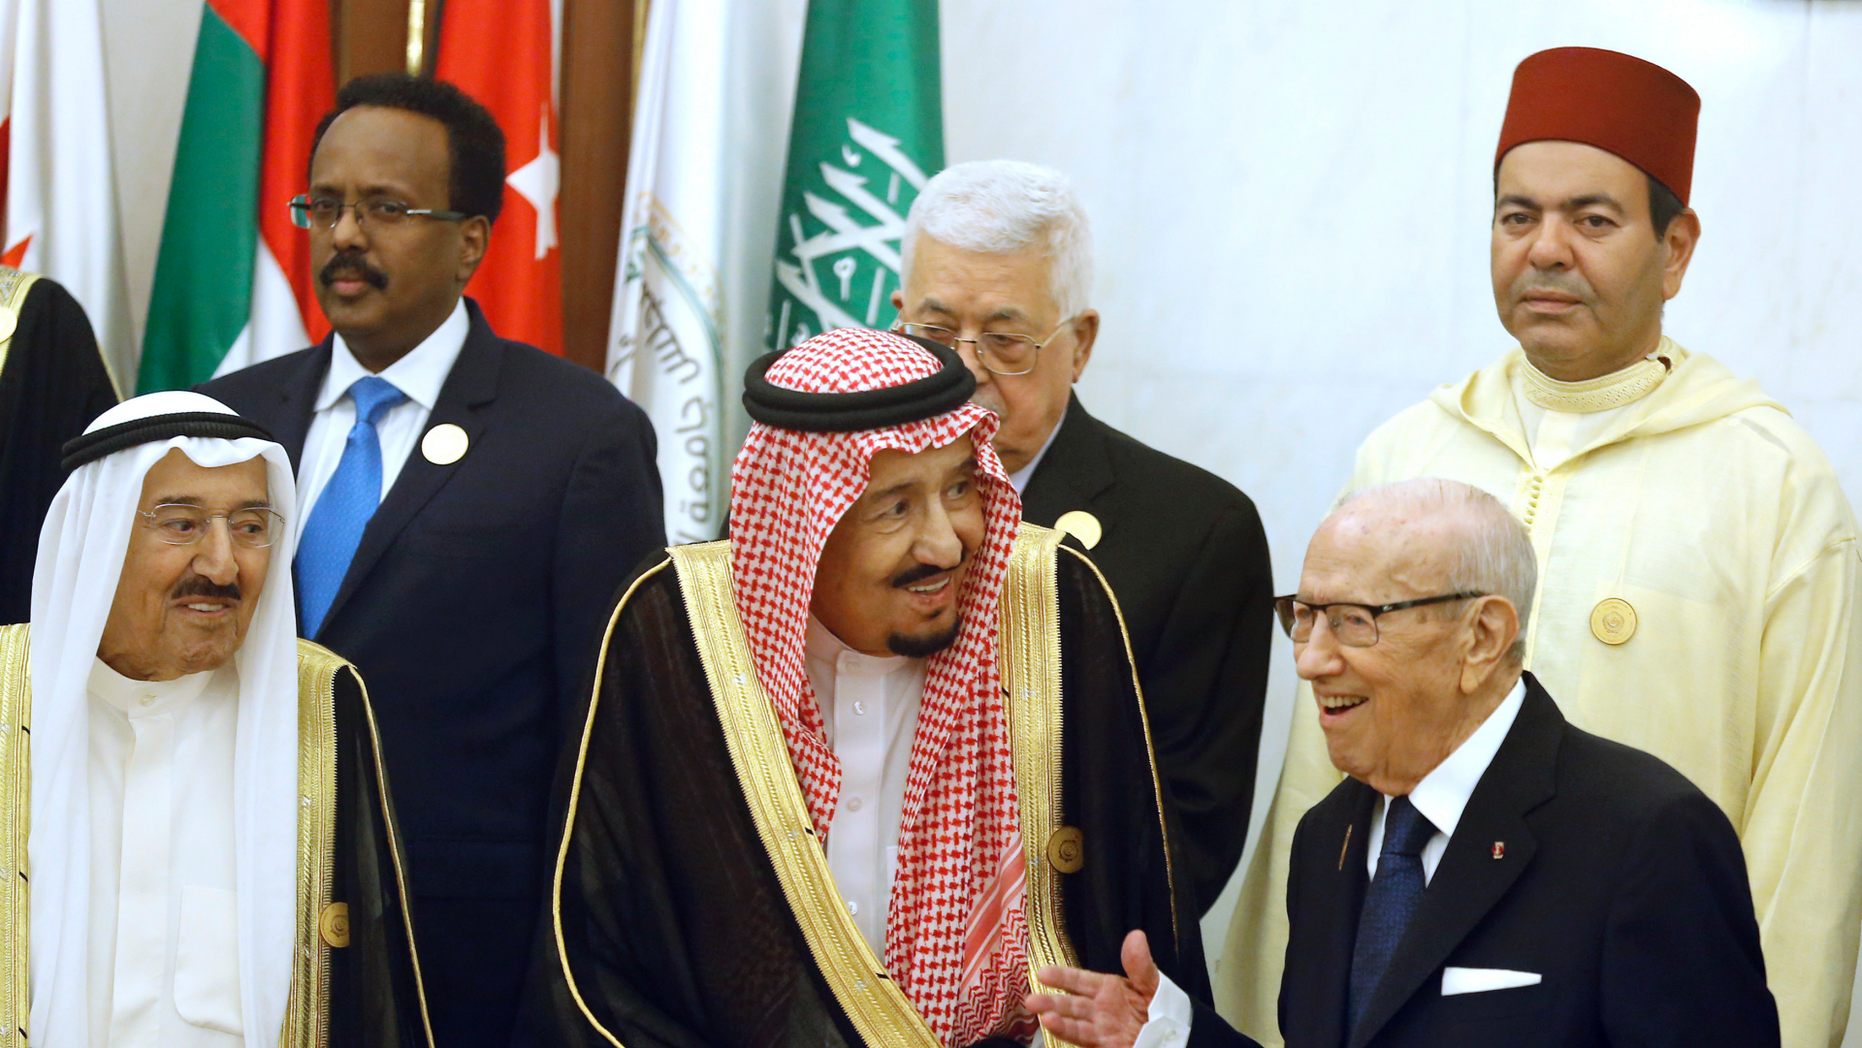 Kuwait's Emir Sheikh Sabah al-Ahmad al-Jaber al-Sabah, left, and Saudi Arabia's King Salman, center, listen to Tunisian President Beji Caid Essebsi, right, during a group photo session ahead of an emergency Arab summit in Mecca, Saudi Arabia, Thursday, May 30, 2019. King Salman opened an emergency summit of Gulf Arab leaders in the holy city of Mecca on Thursday with a call for the international community to use all means to confront Iran, but he also said the kingdom extends its hand for peace. (AP Photo/Amr Nabil)